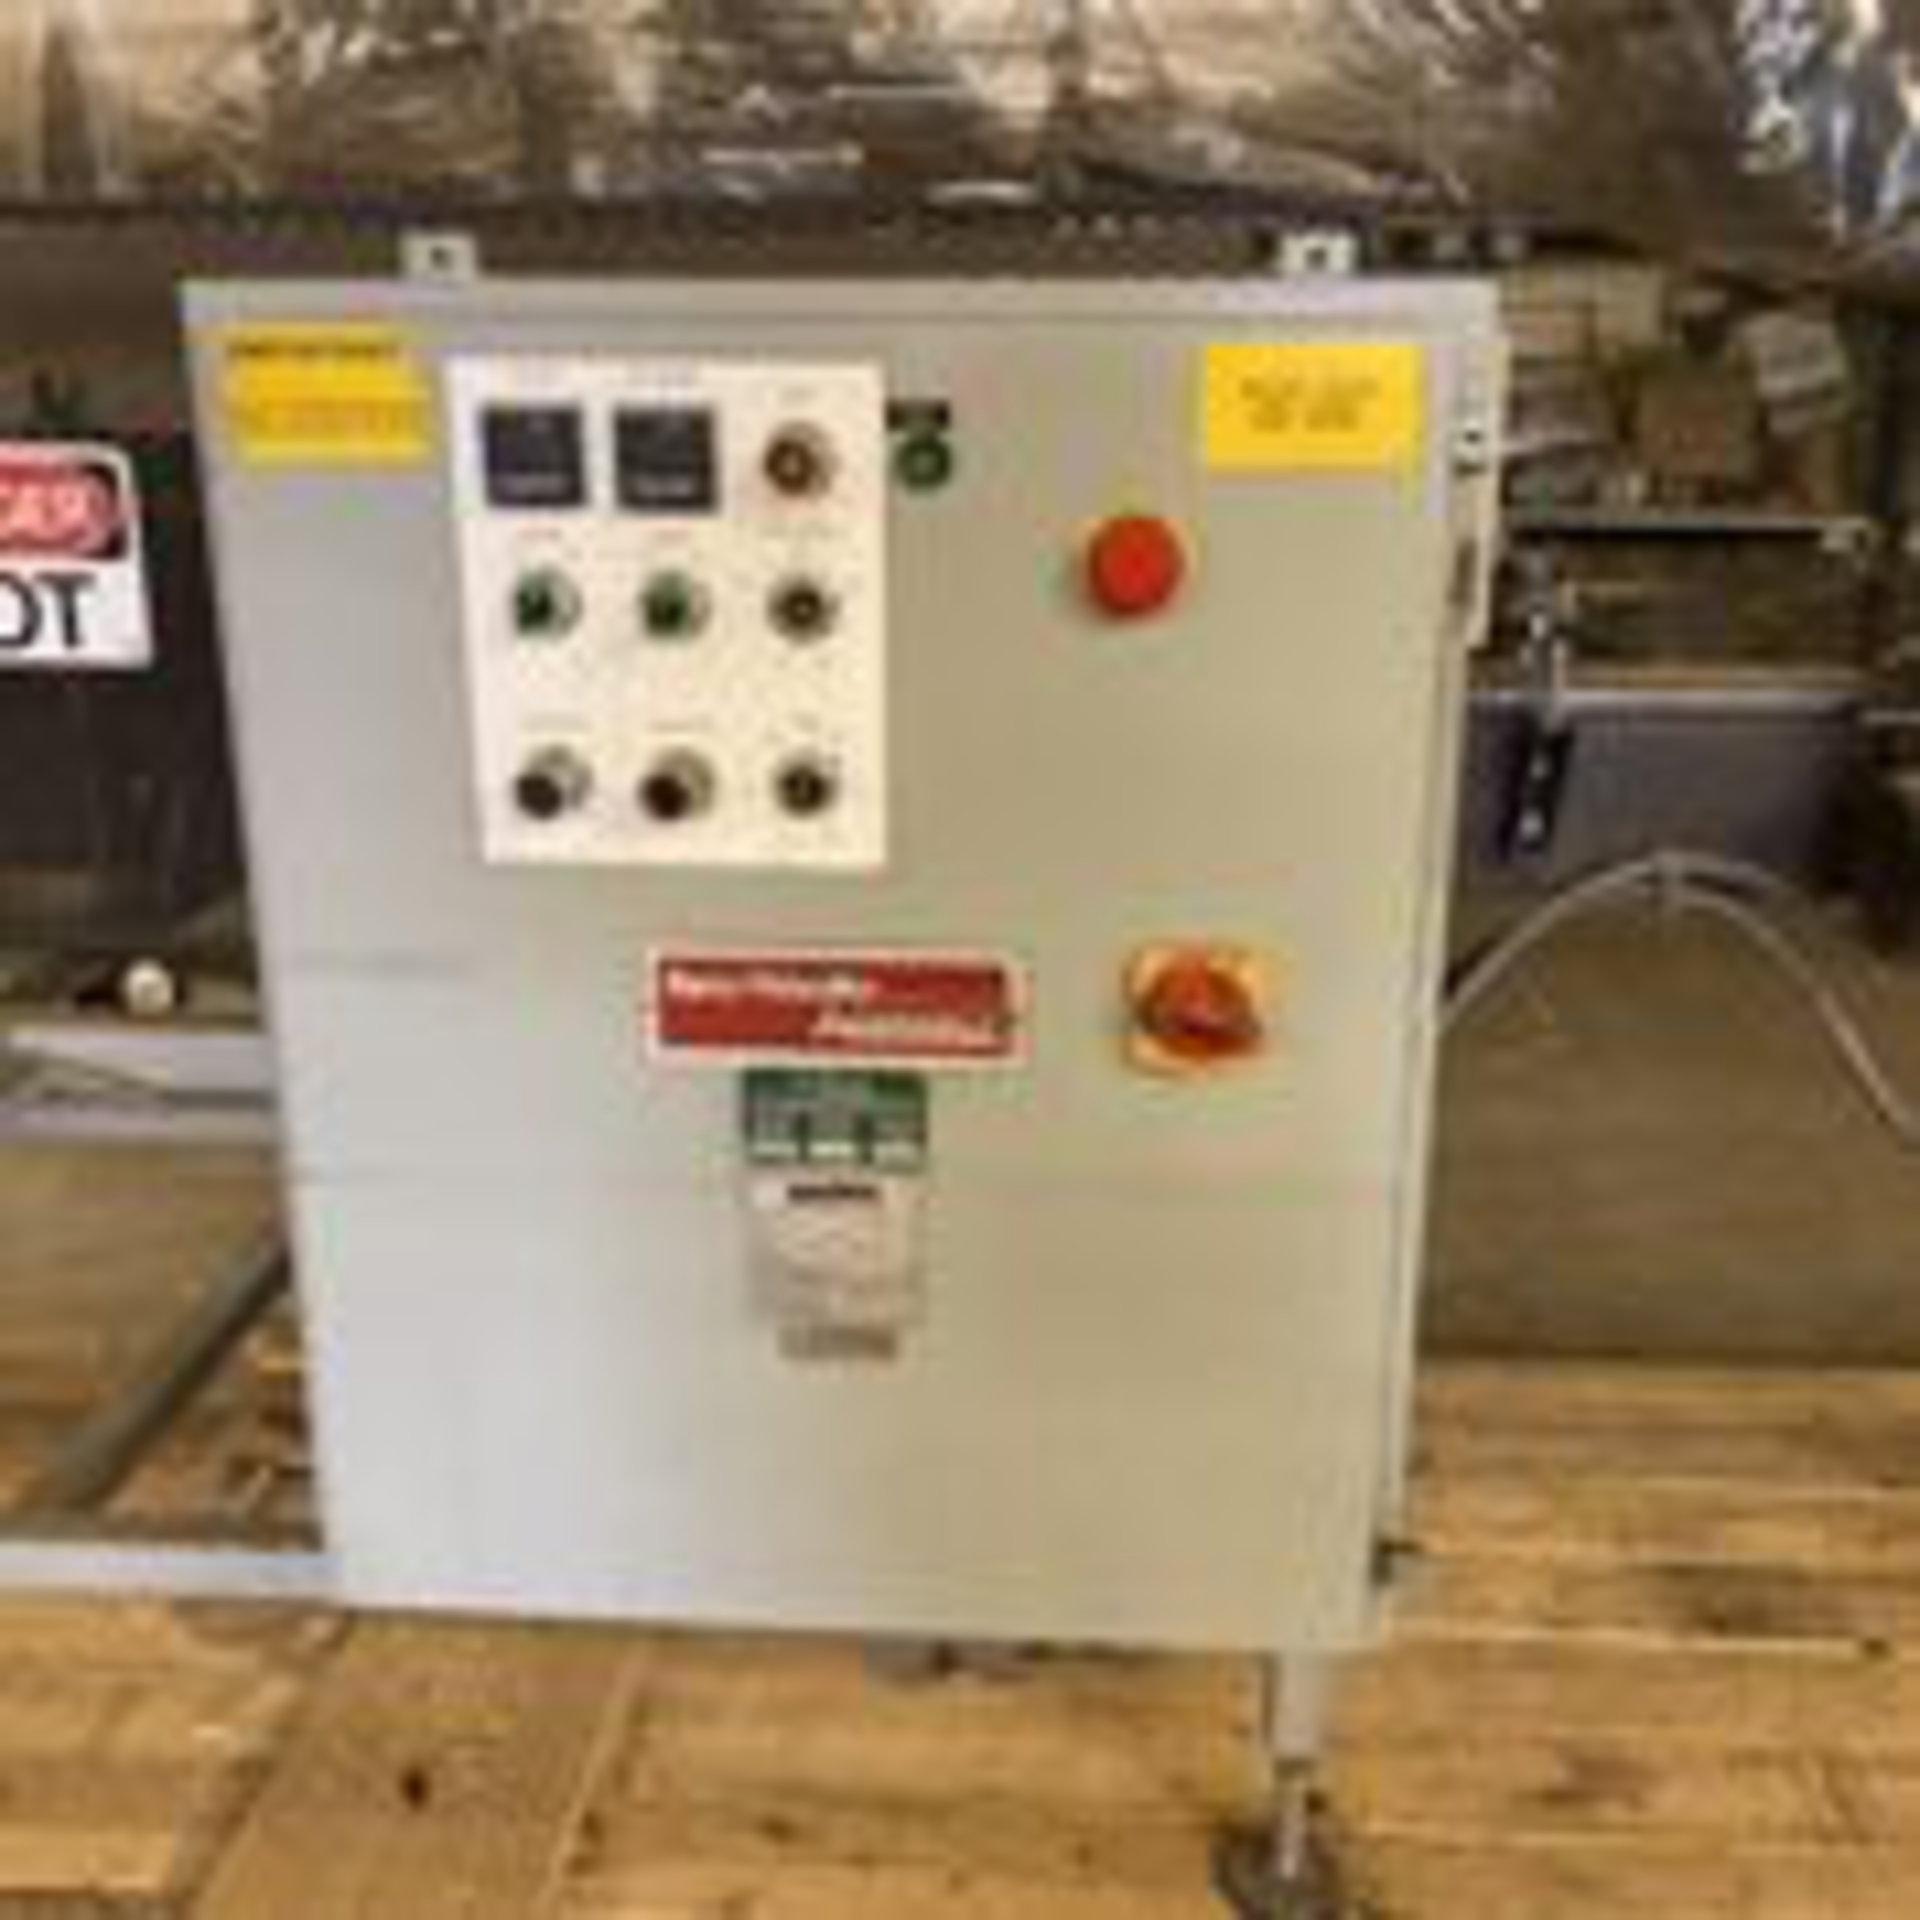 Accraply Trine Heat Tunnel Model 105HT S/N MSN05936 . LOADING FEE $500 - Image 10 of 15